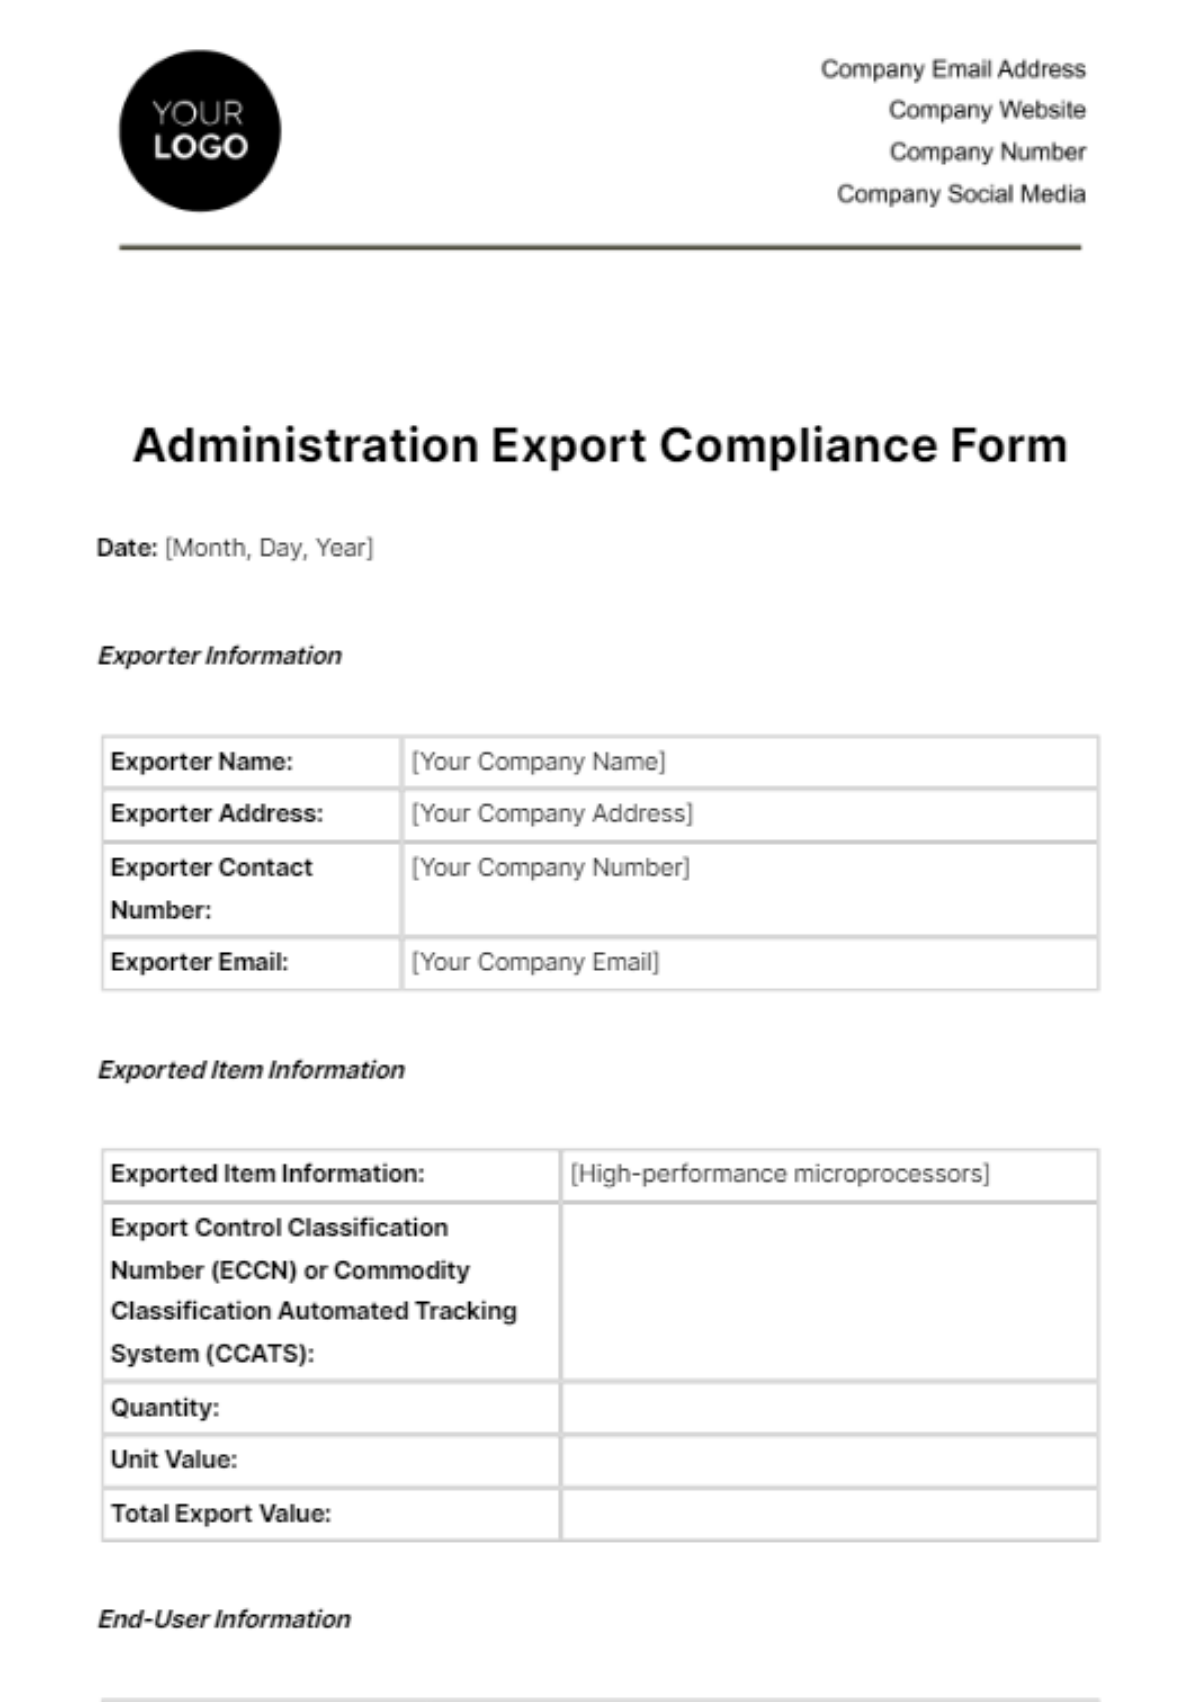 Administration Export Compliance Form Template